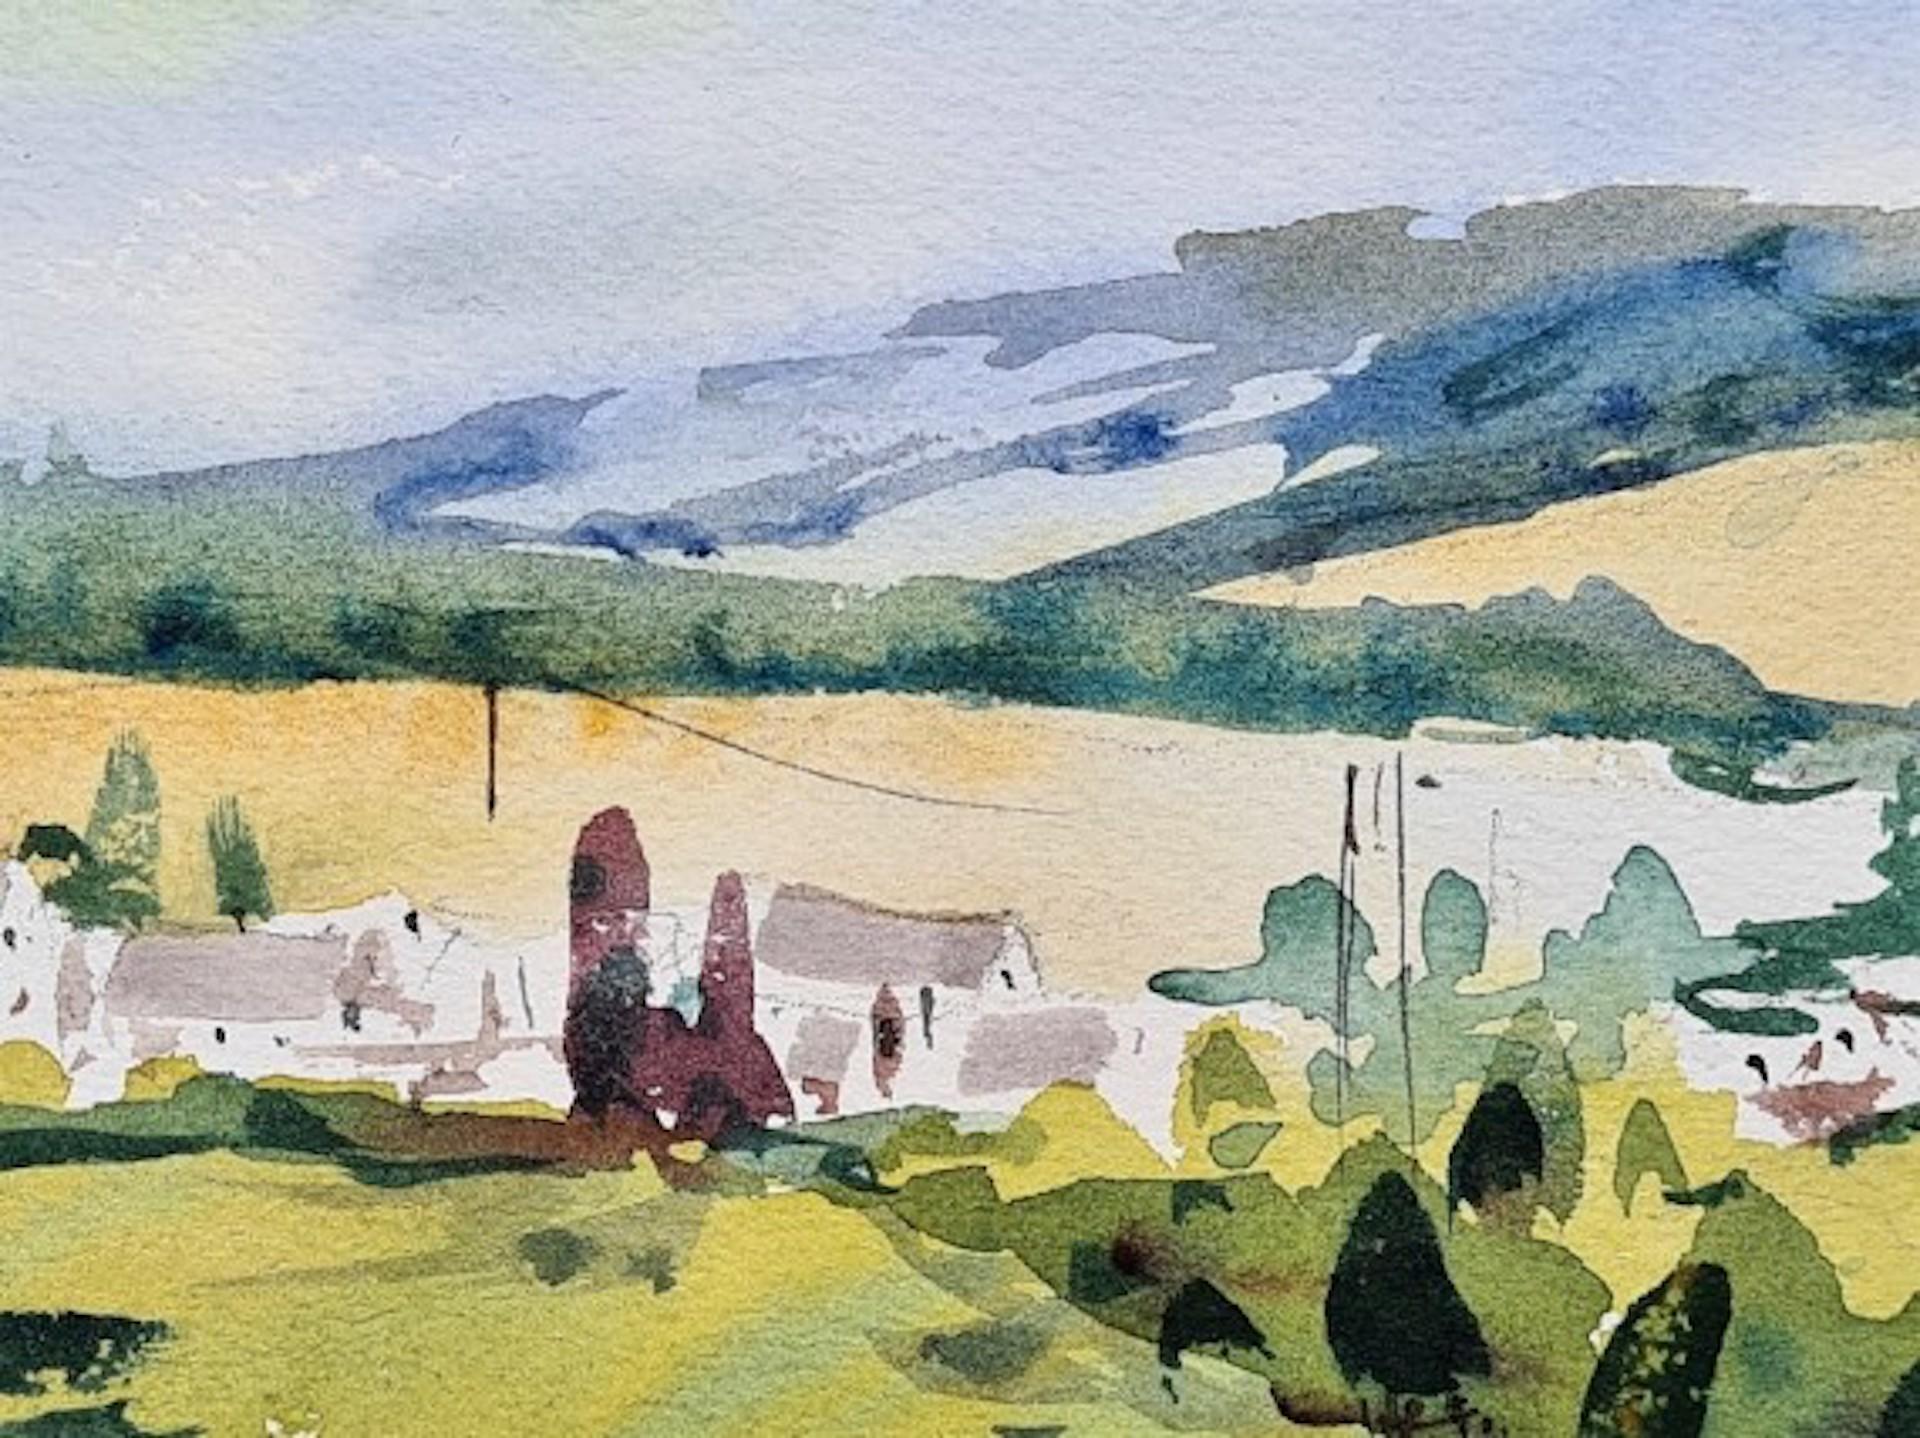 Whiteshill, Stroud, Gloucestershire By Max Panks [2020]
original

Watercolour on Paper

Image size: H:28 cm x W:38 cm

Complete Size of Unframed Work: H:31 cm x W:41 cm x D:0.1cm

Sold Unframed

Please note that insitu images are purely an